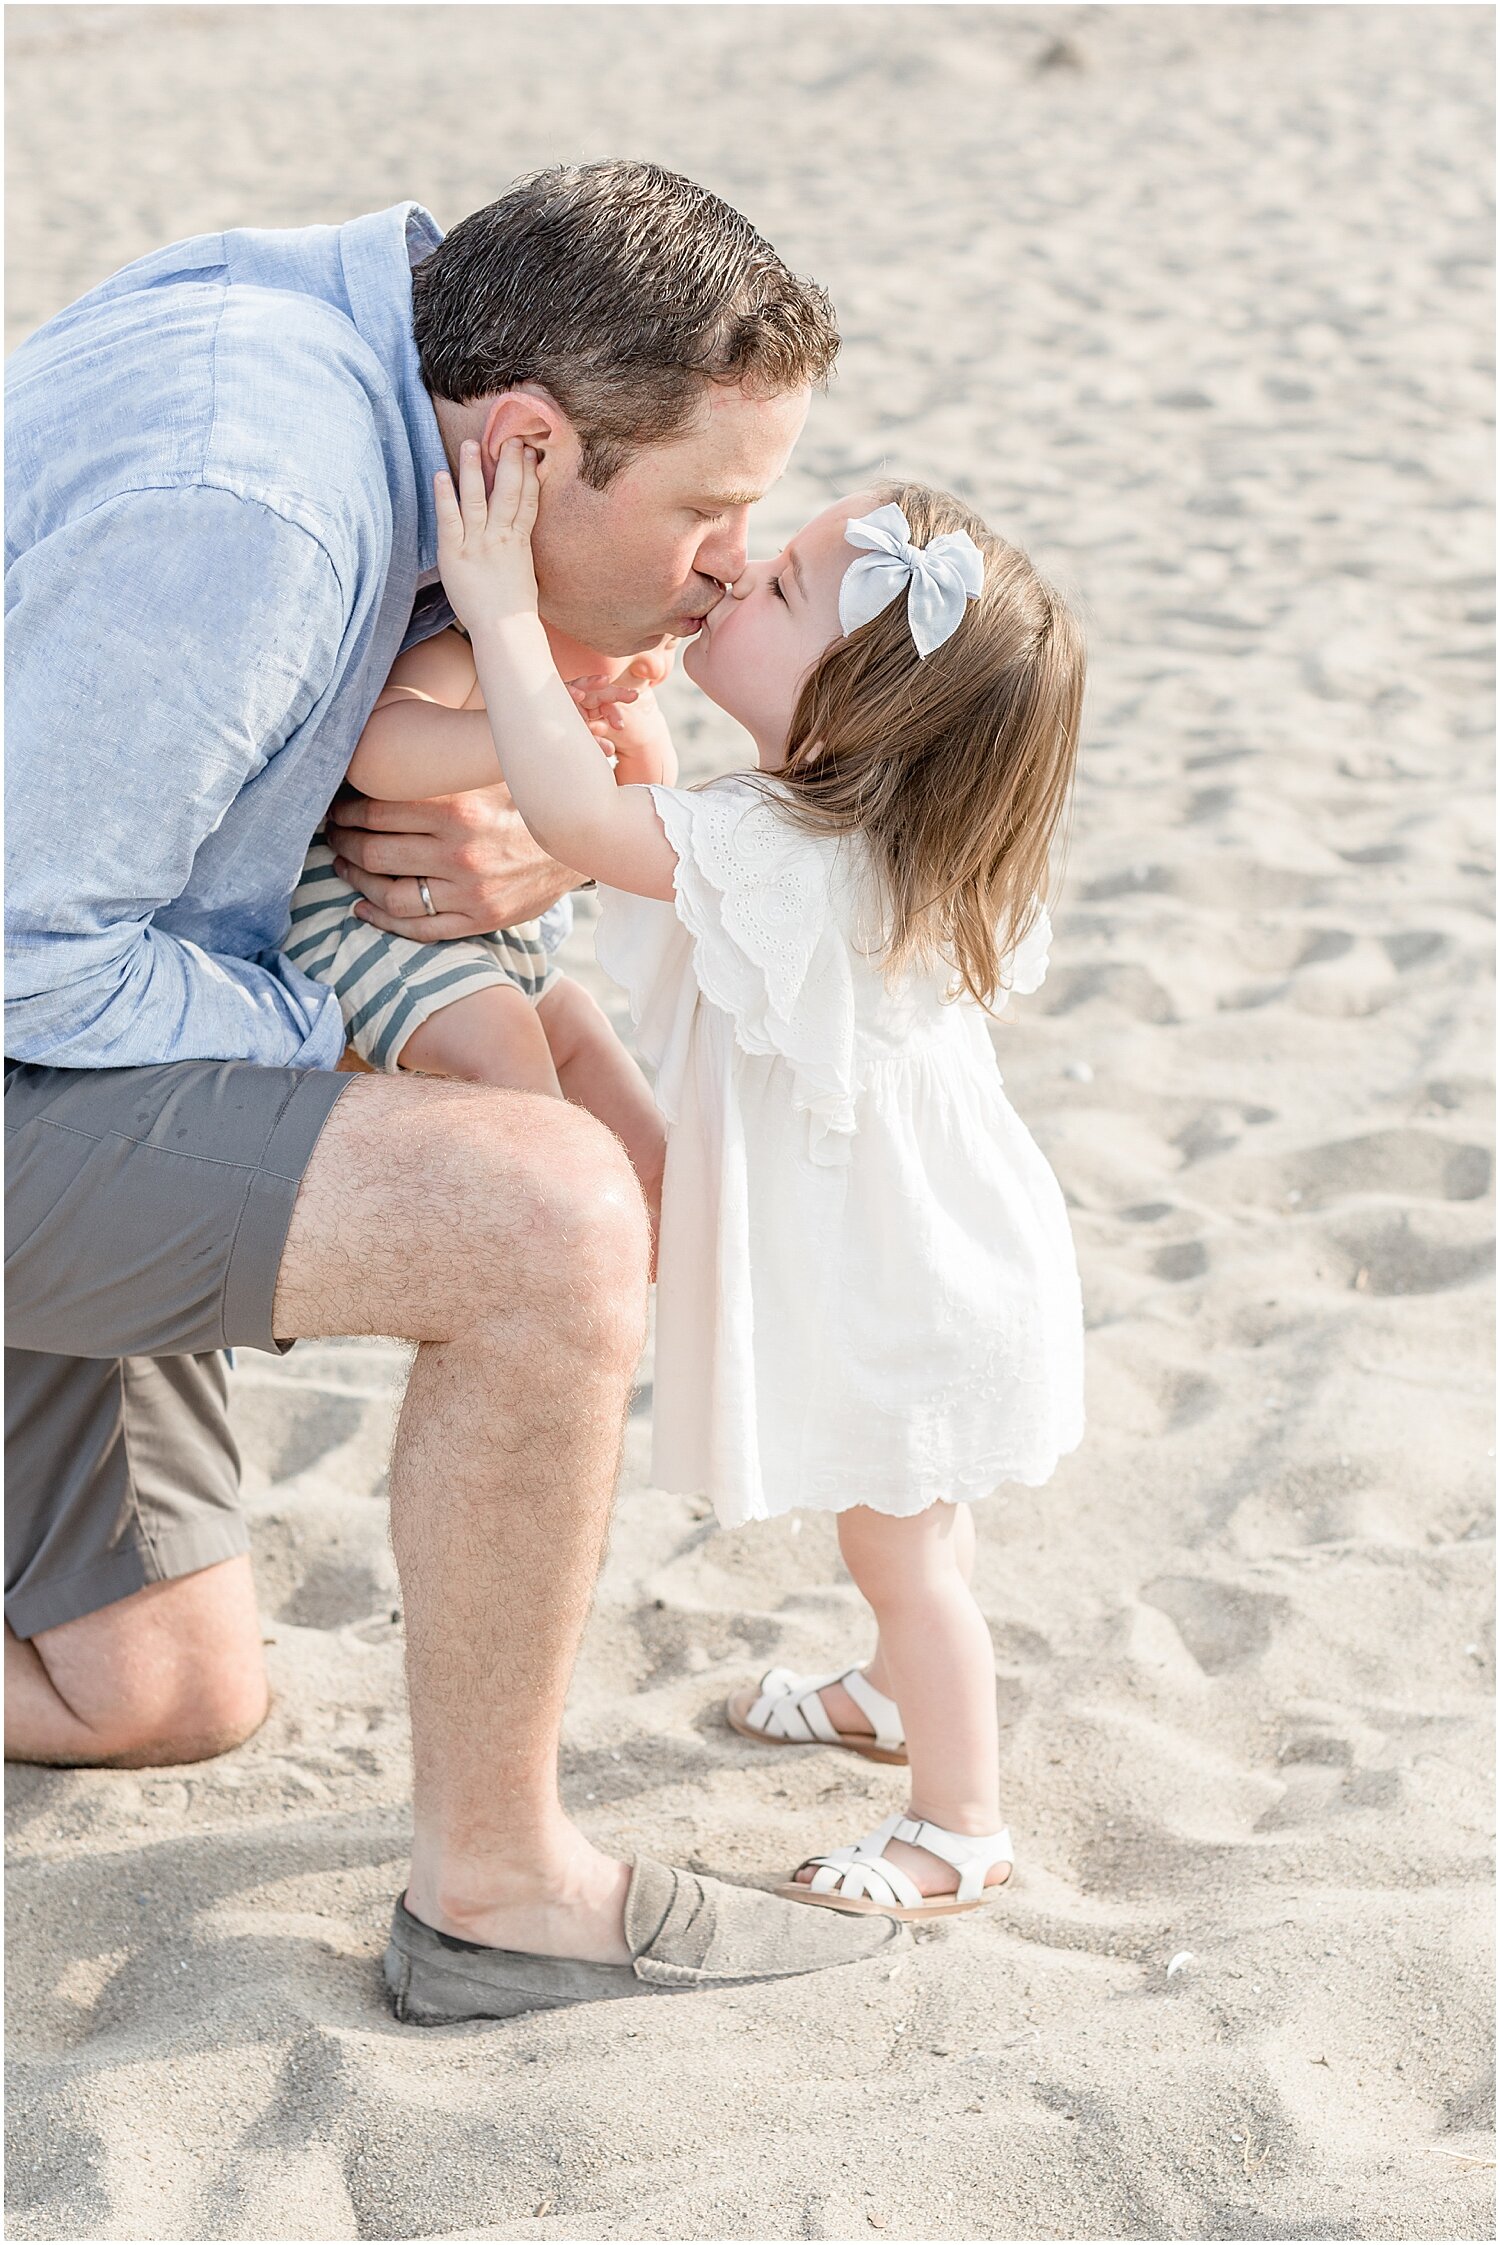 Sweet moment between Daddy and daughter on the beach in Westport, CT during family photoshoot. Photos by Westport, CT Family Photographer, Kristin Wood Photography.